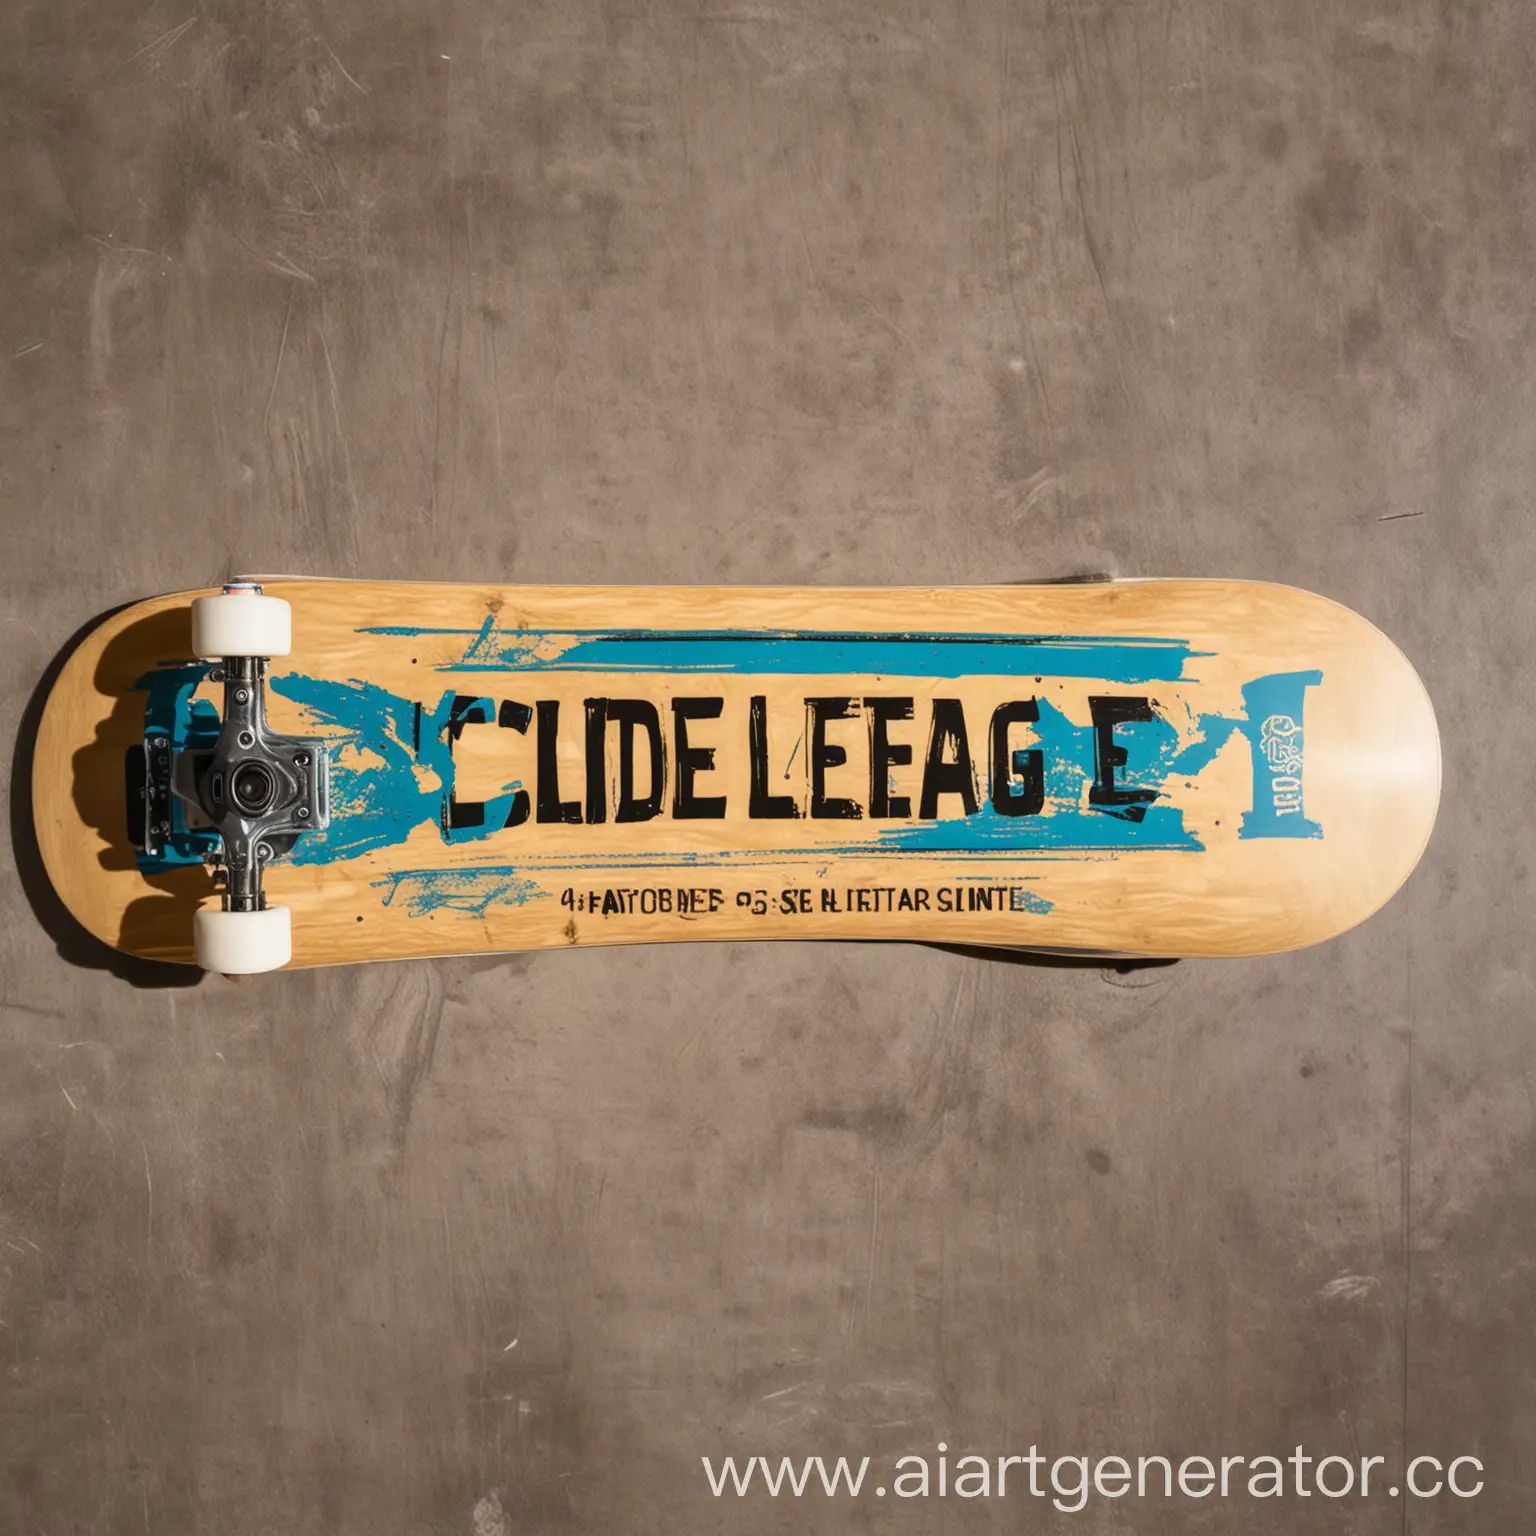 Skateboard-with-Slide-League-Inscription-for-Extreme-Sports-Enthusiasts